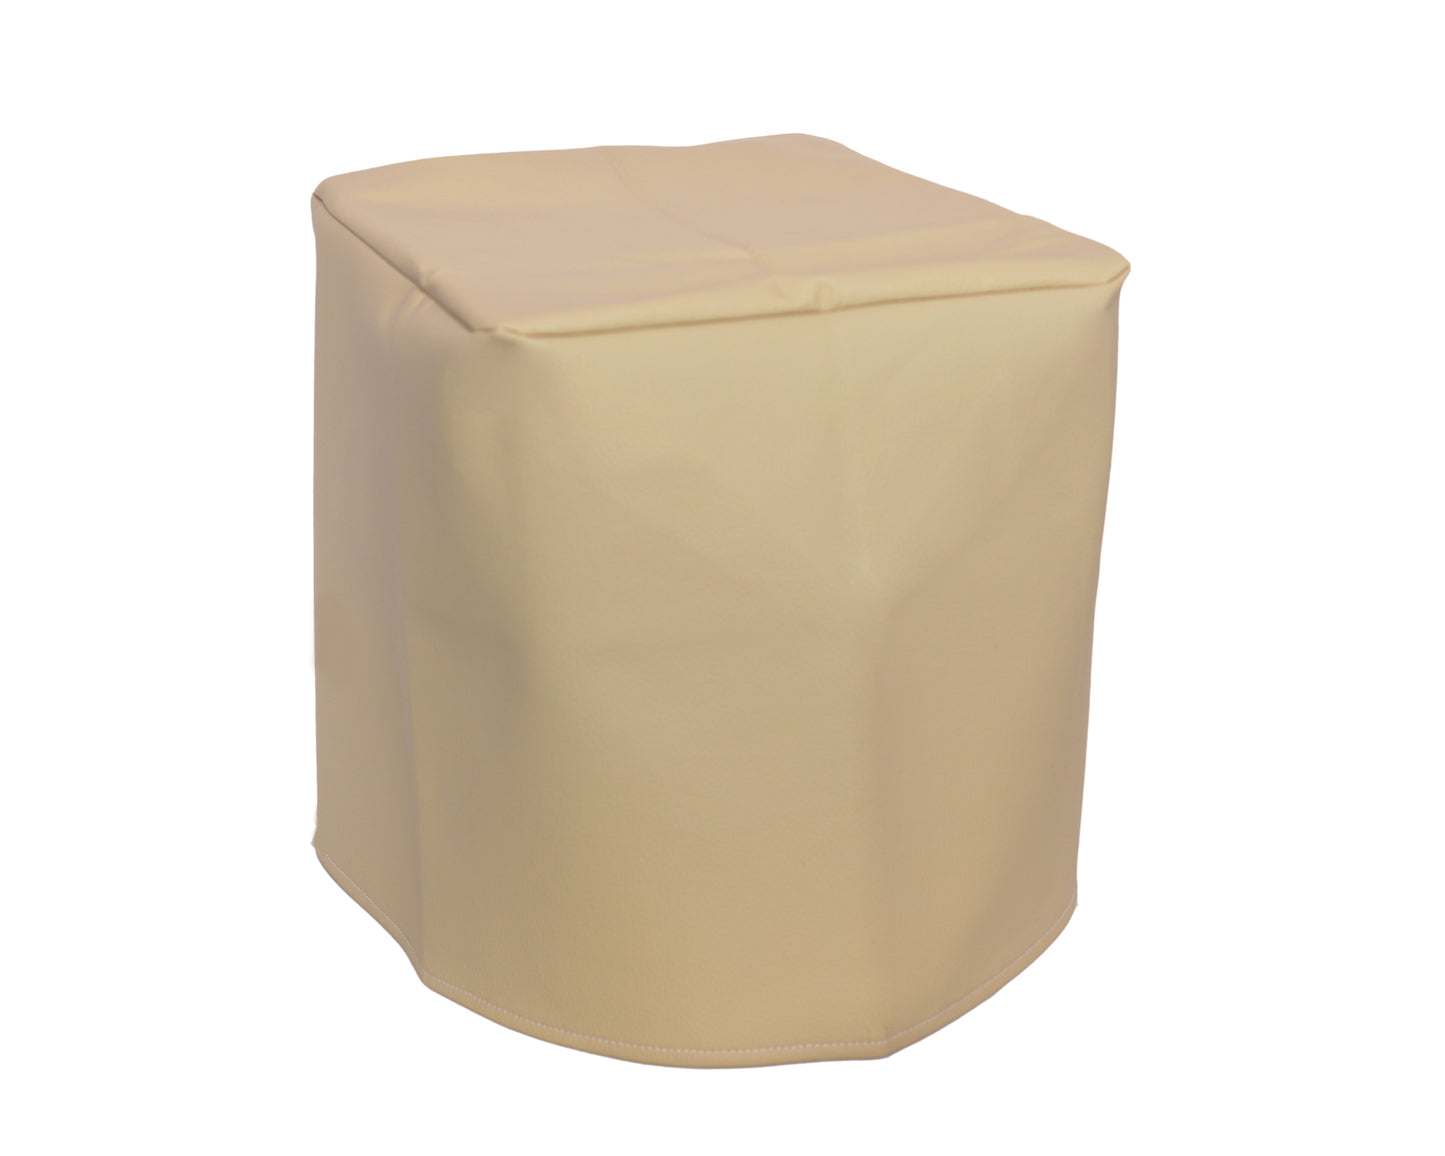 The Perfect Dust Cover, Beige Padded Cover Compatible with Instant Pot - 6 Quart Vortex 4-in-1 Air Fryer Oven Model 140-3000-01, Anti-Static, Doble Stitched and Waterproof Dust Cover Dimensions 14.9'W x 12.5''D x 12.8''H by The Perfect Dust Cover LLC